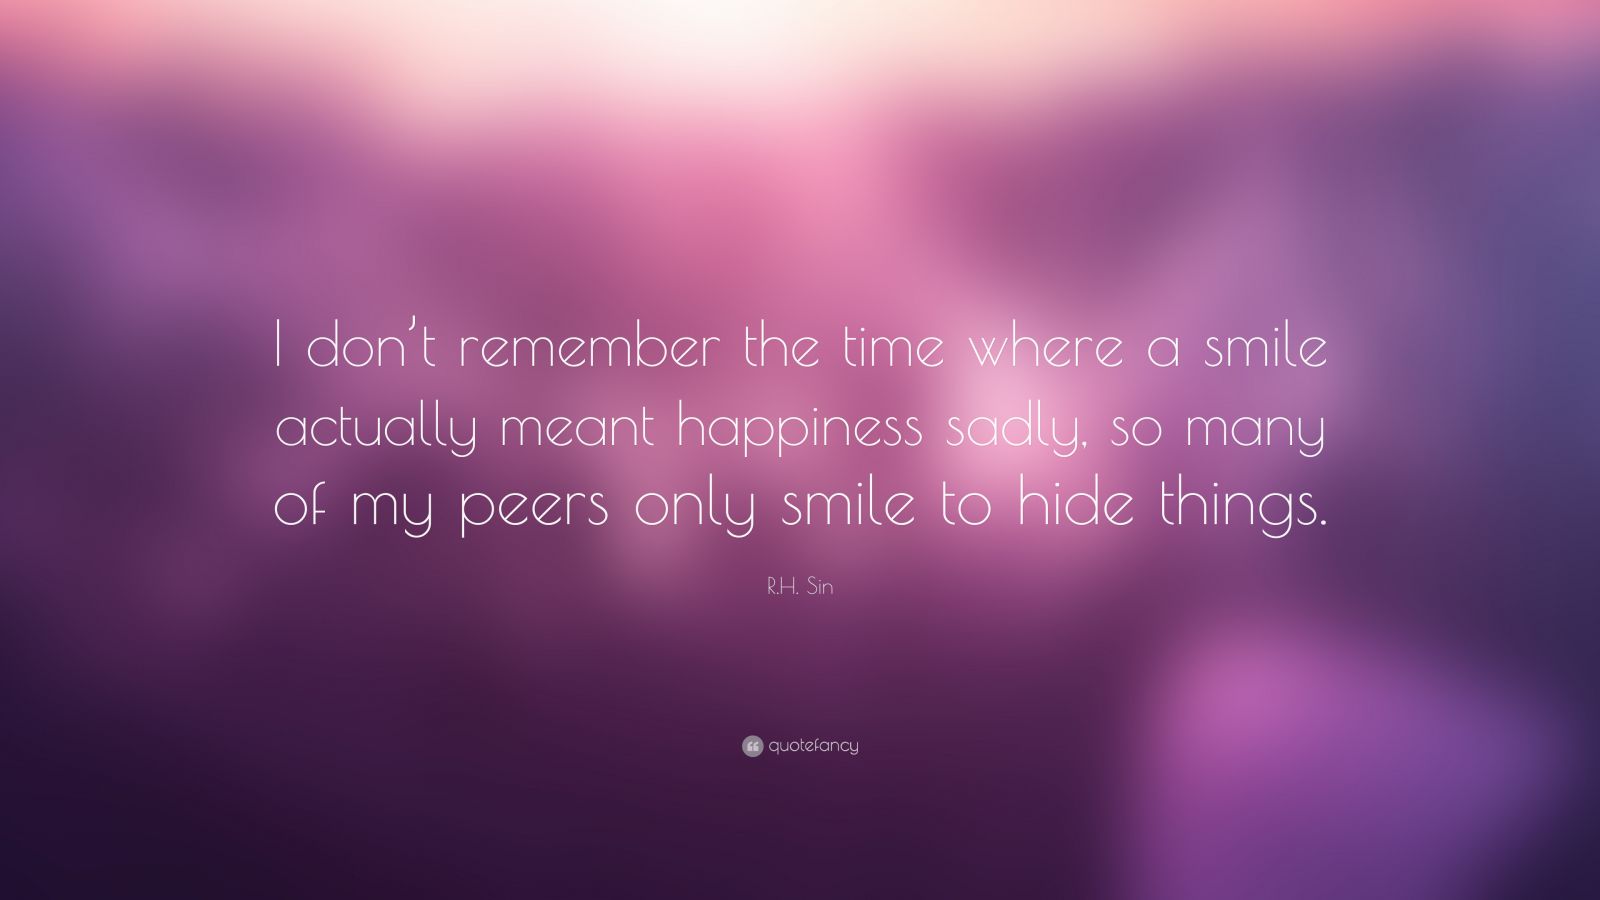 R.H. Sin Quote: “I don't remember the time where a smile actually meant  happiness sadly